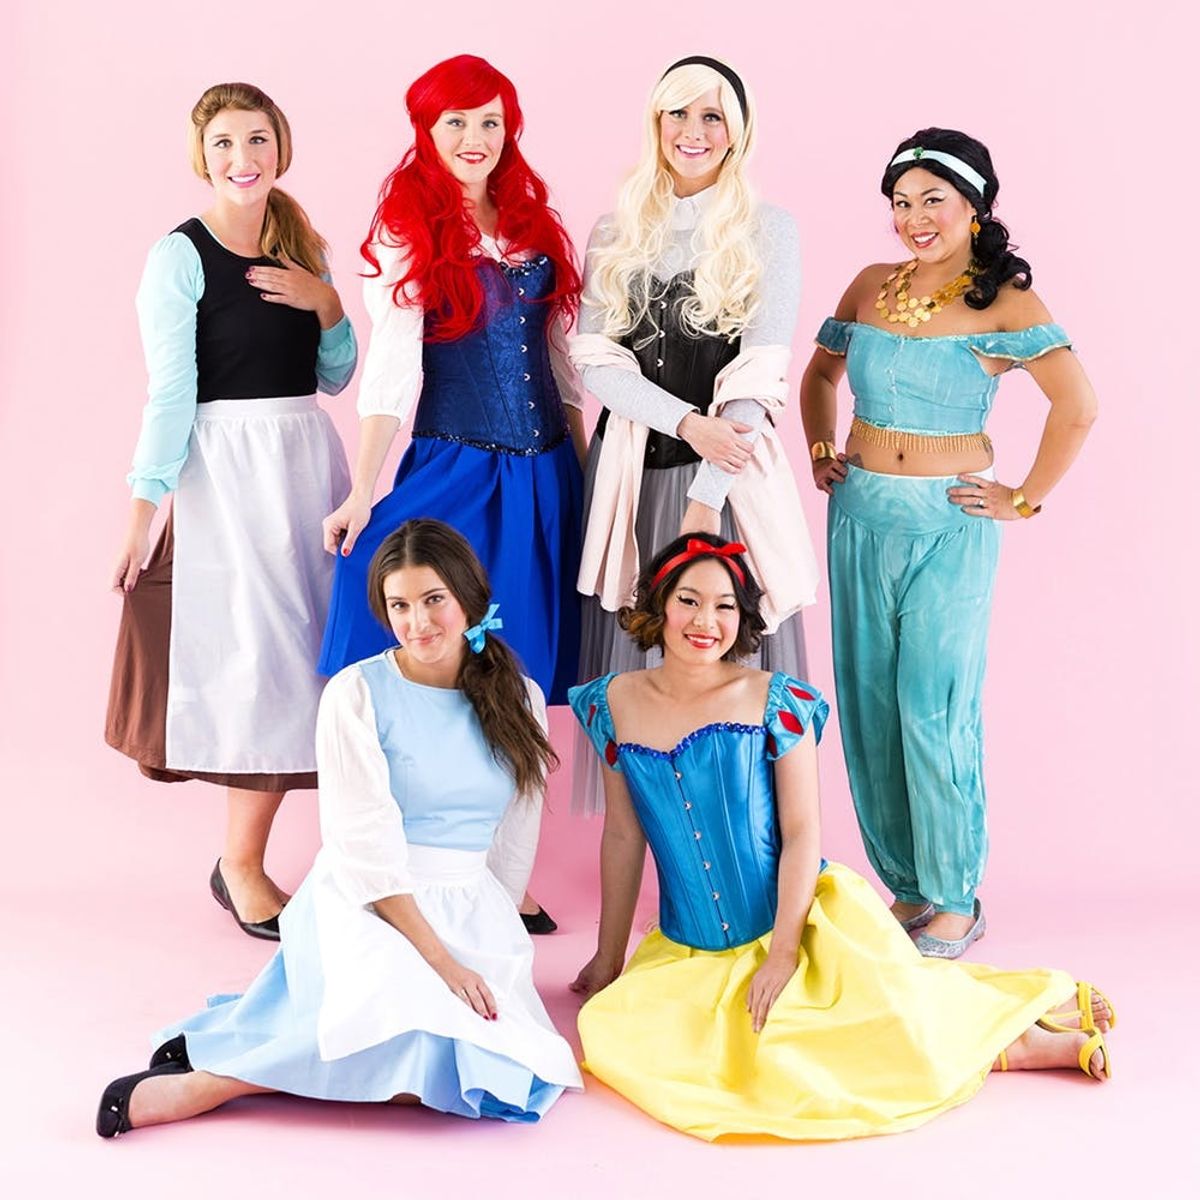 Make Your Dreams Come True With This Disney Princess Group Halloween Costume